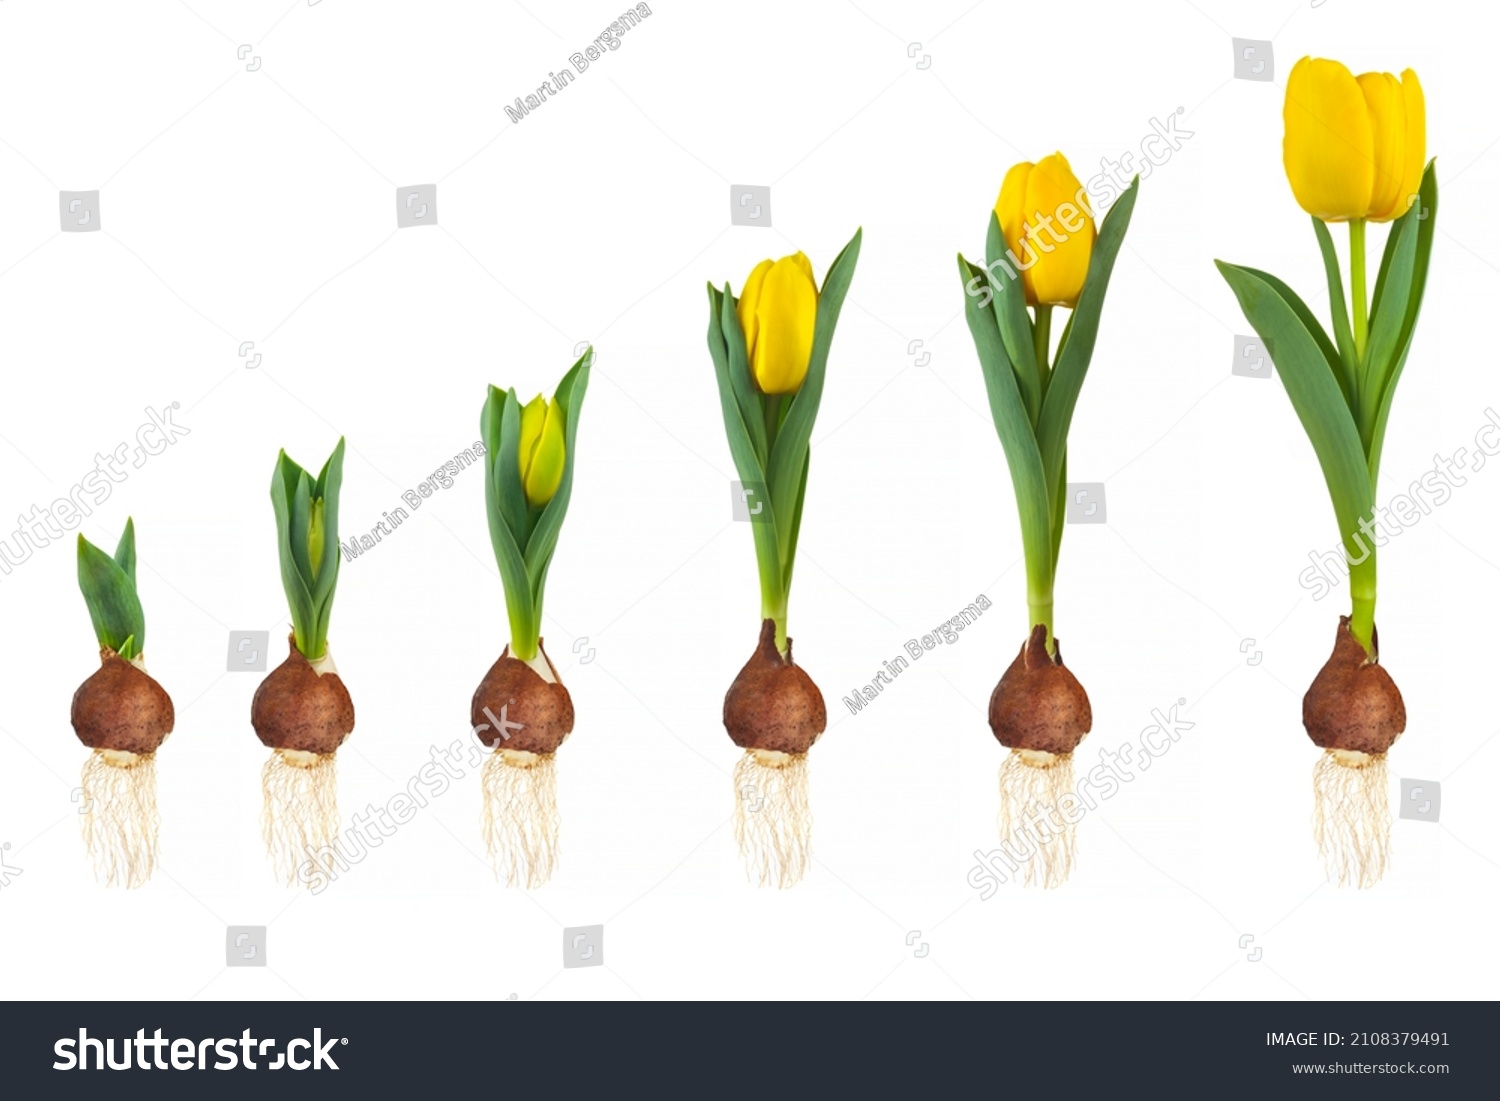 Growth stages of a yellow tulip from flower bulb to blooming flower isolated on a white background #2108379491